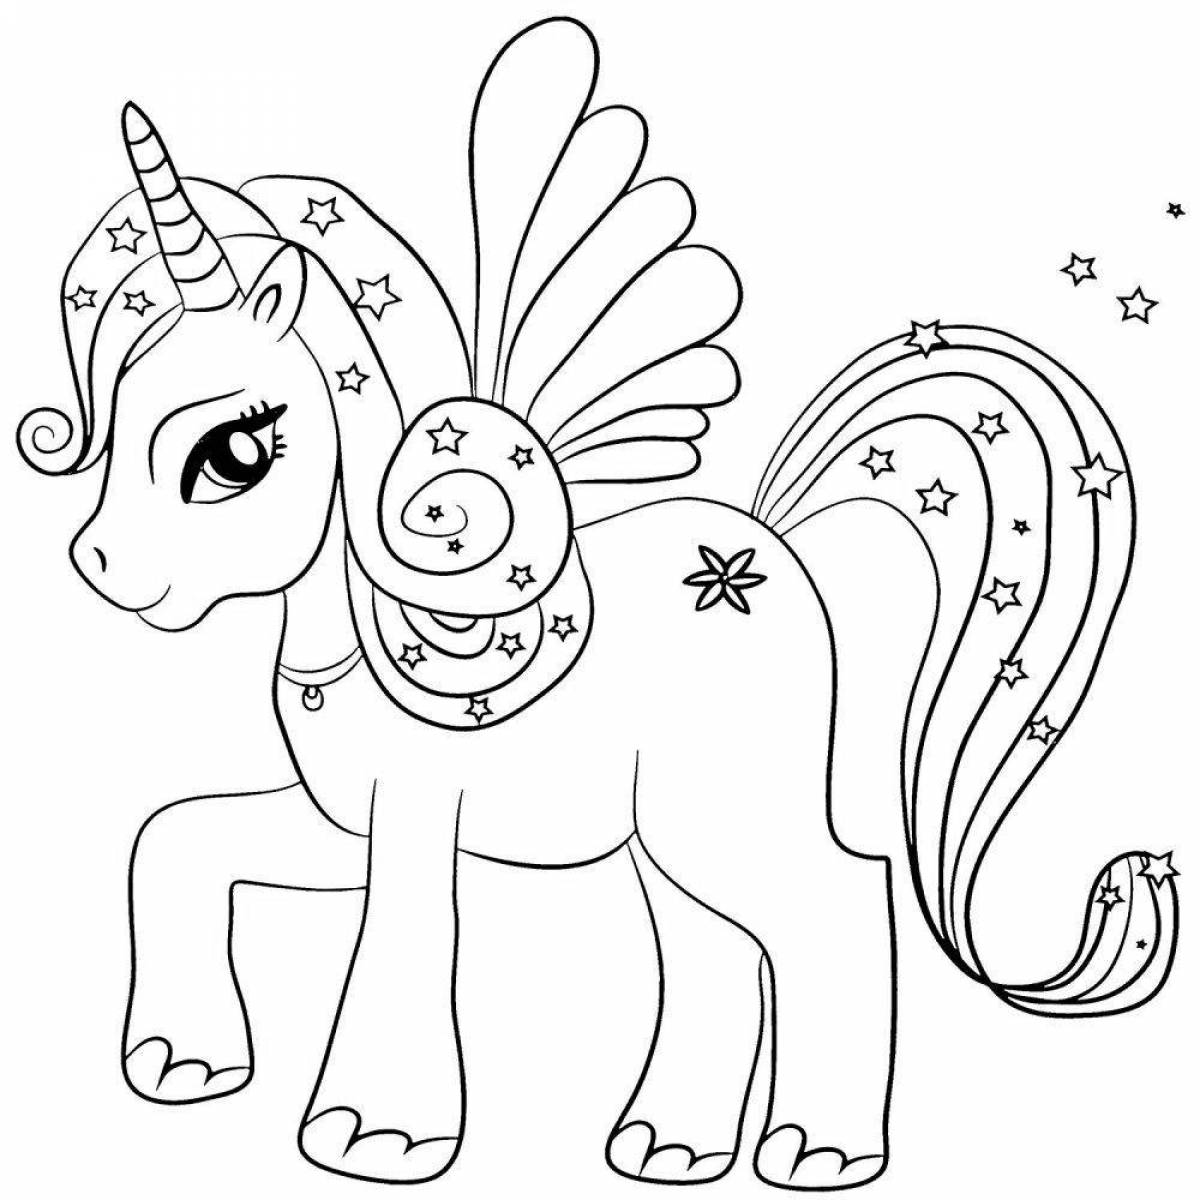 Adorable coloring book for kids 5-6 years old unicorns